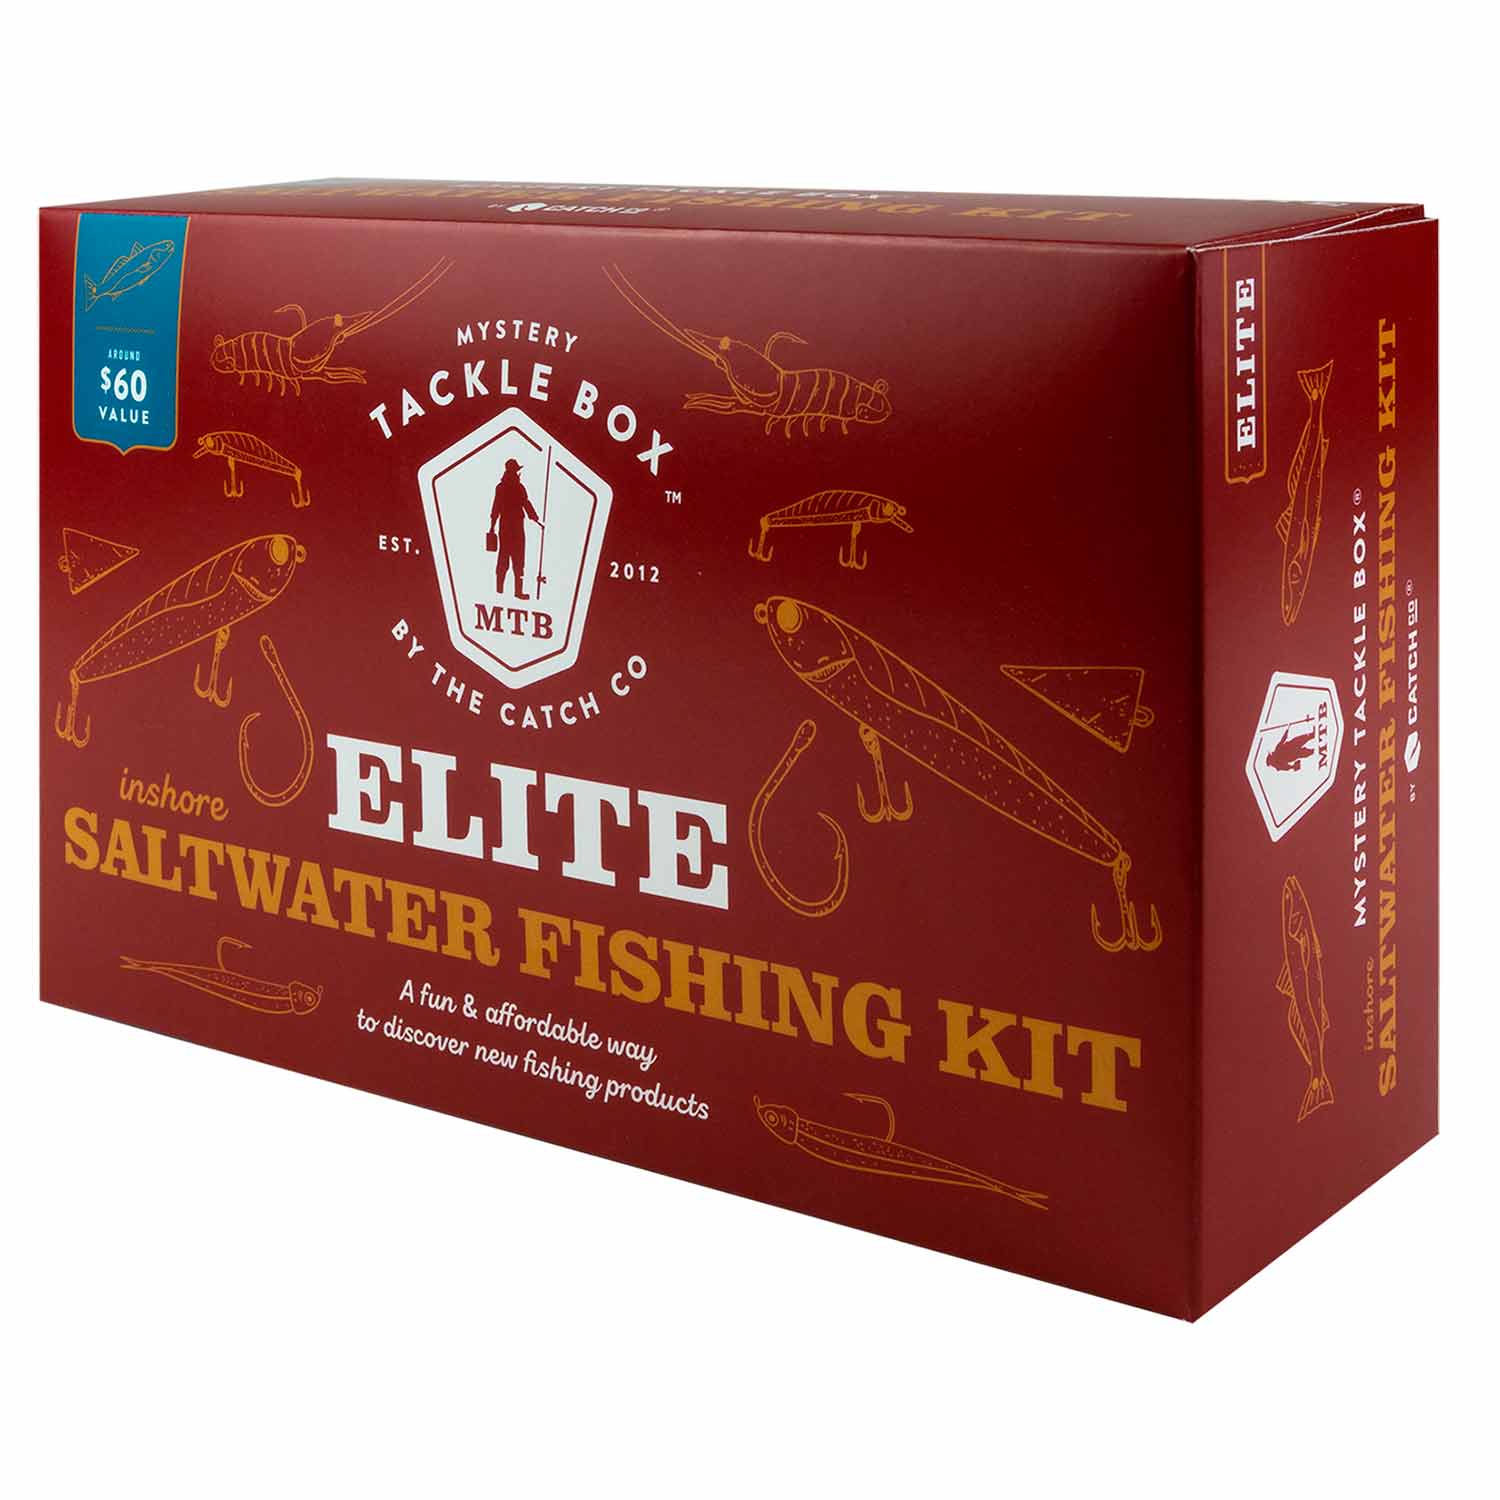 Catch Co Mystery Tackle Box Elite Bass Fishing Kit RED BOX 2 